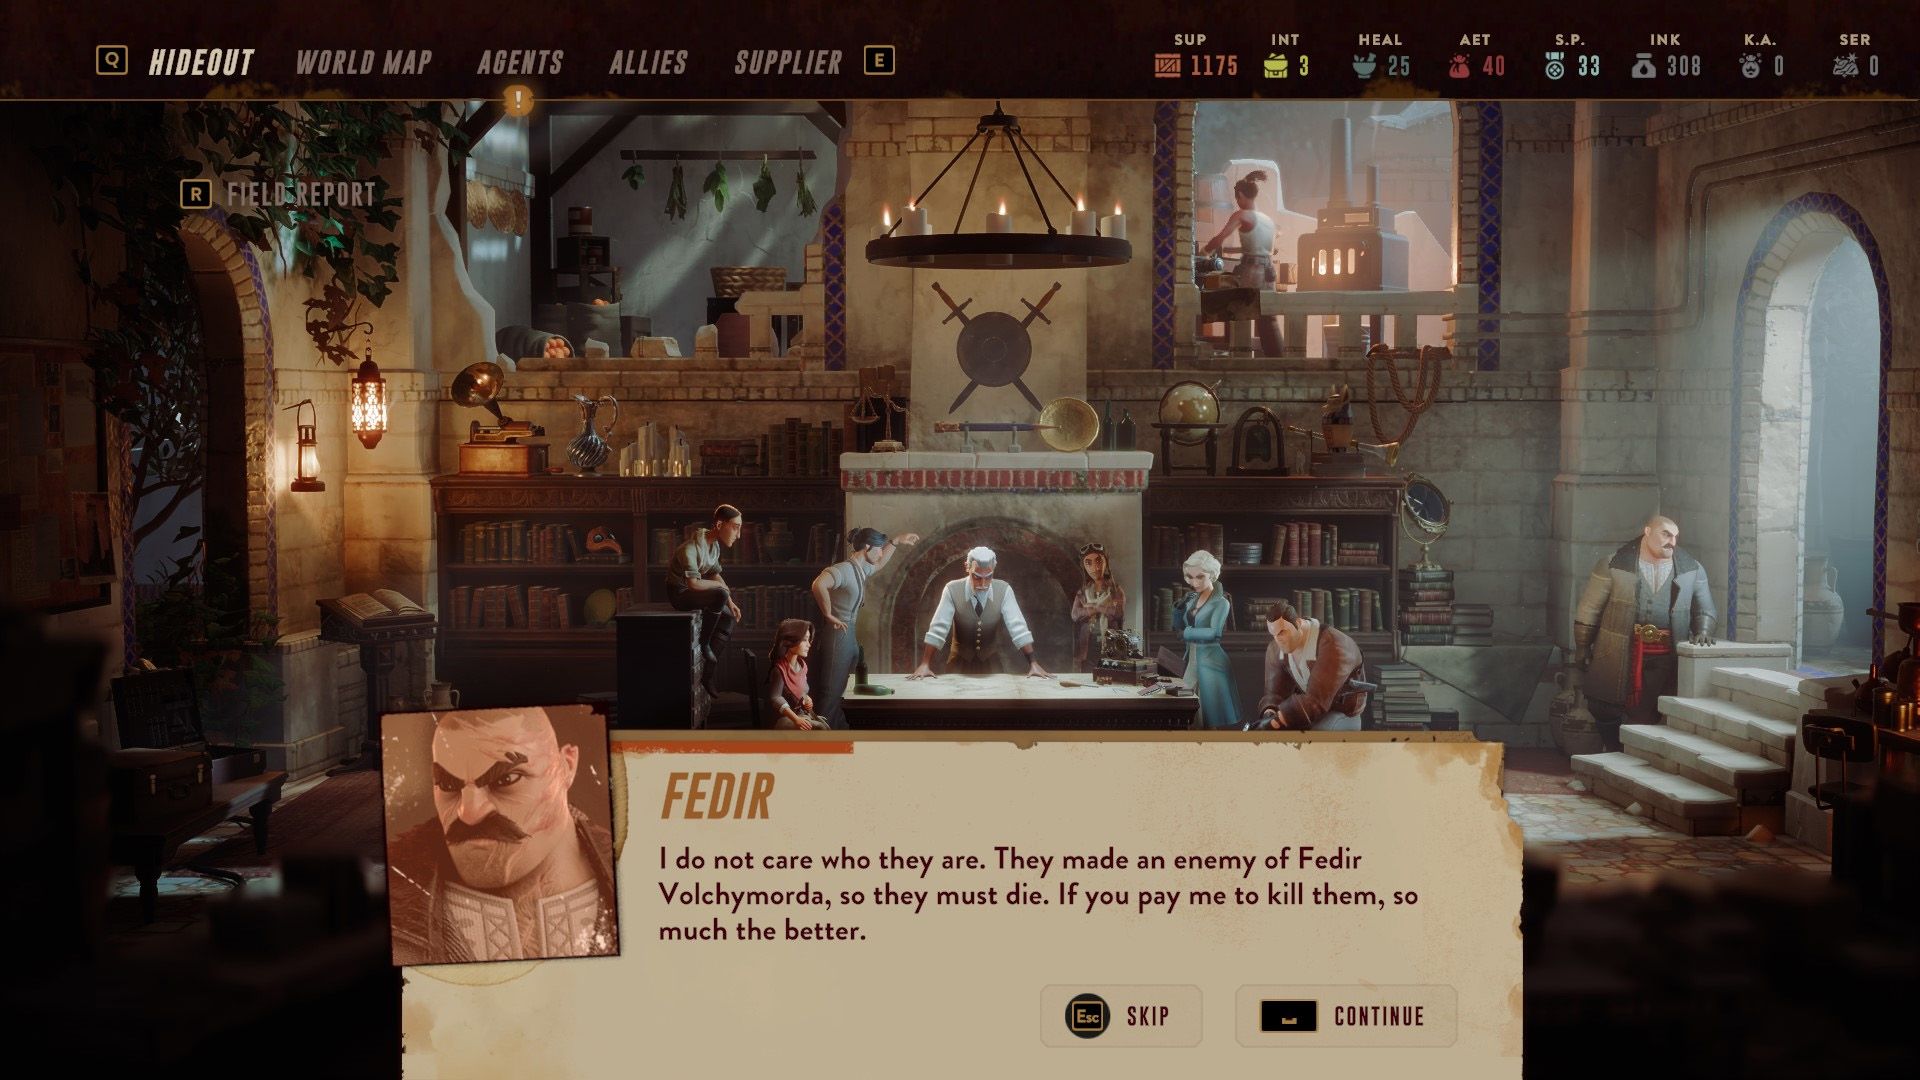 Fedir, a large agent with a mustache, talking about his enemies in Lamplighters League.